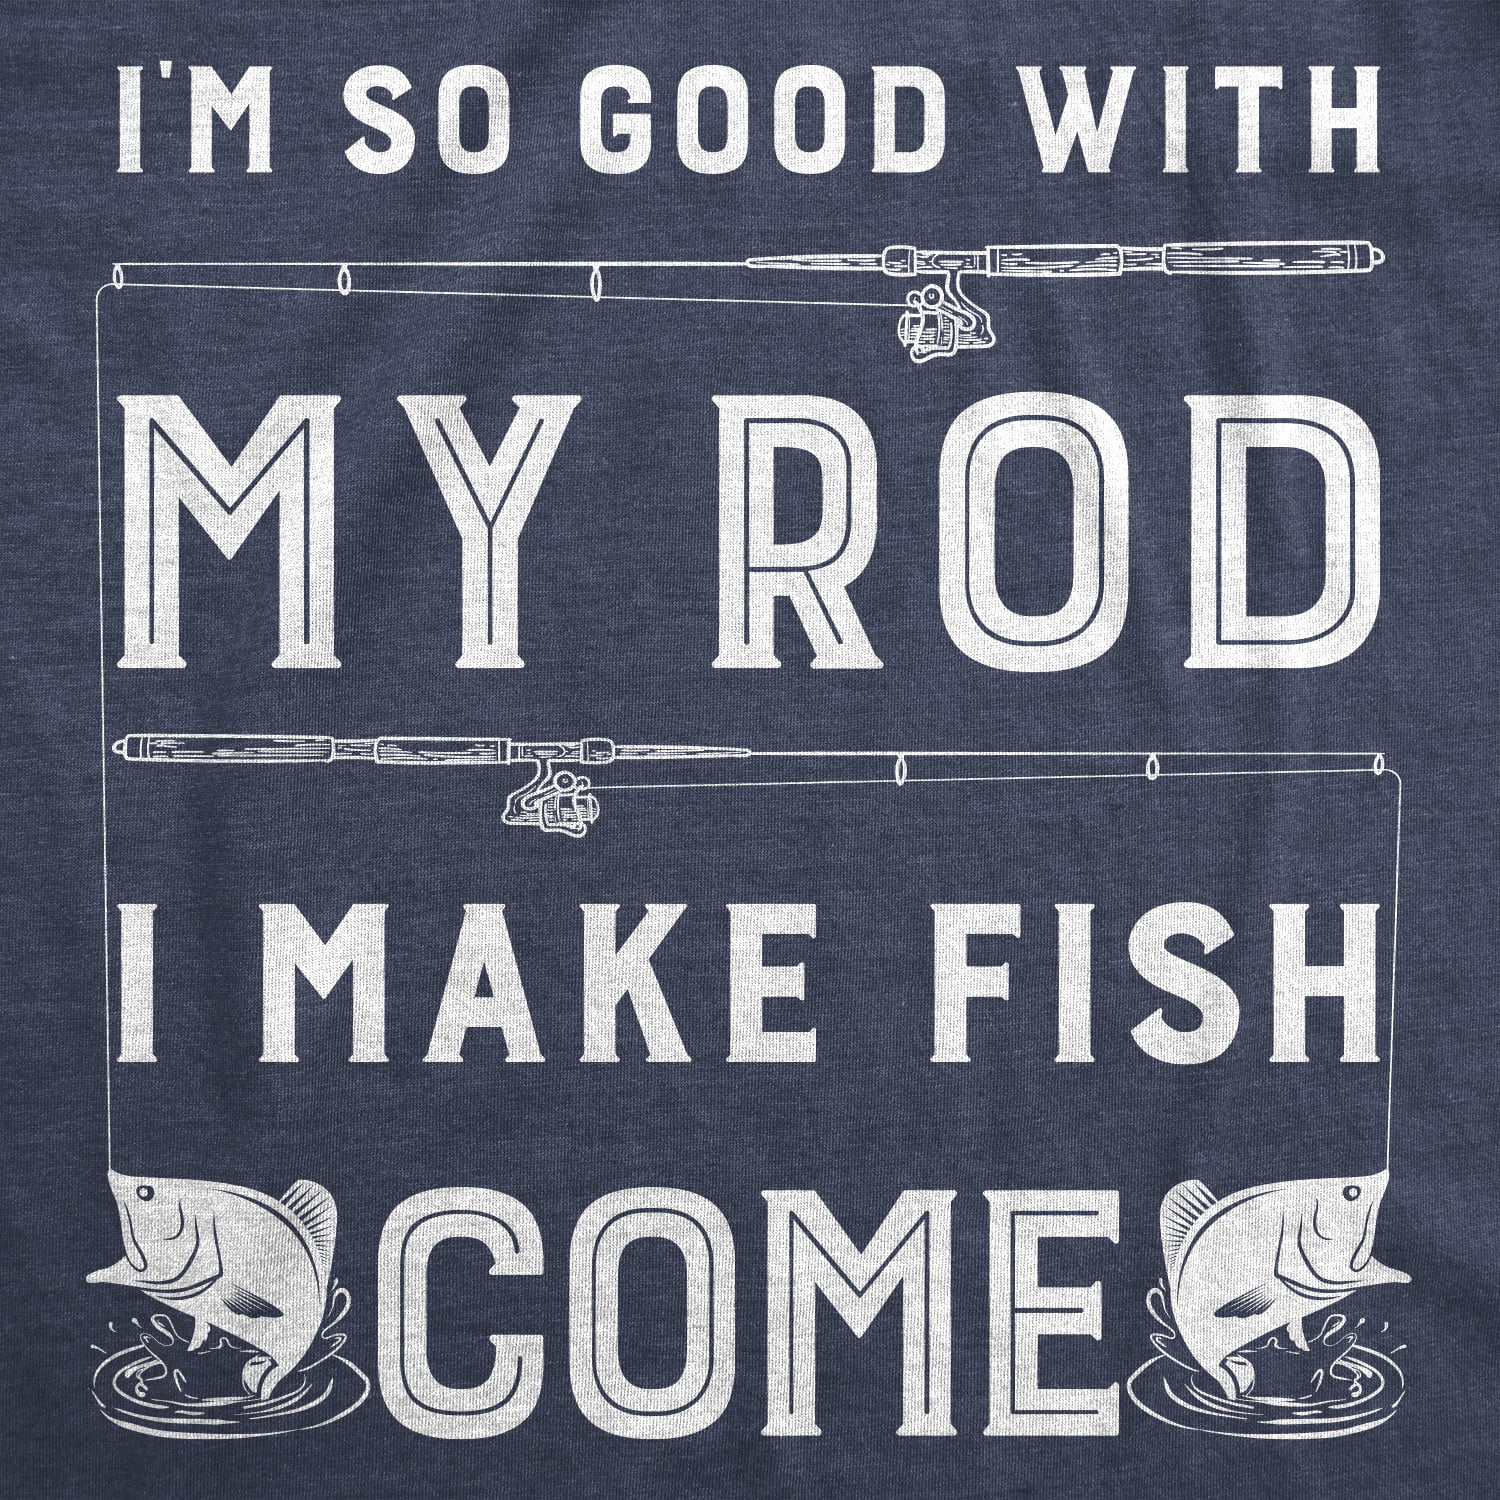 I Make Fish Come! Shirts So Good With My Rod..